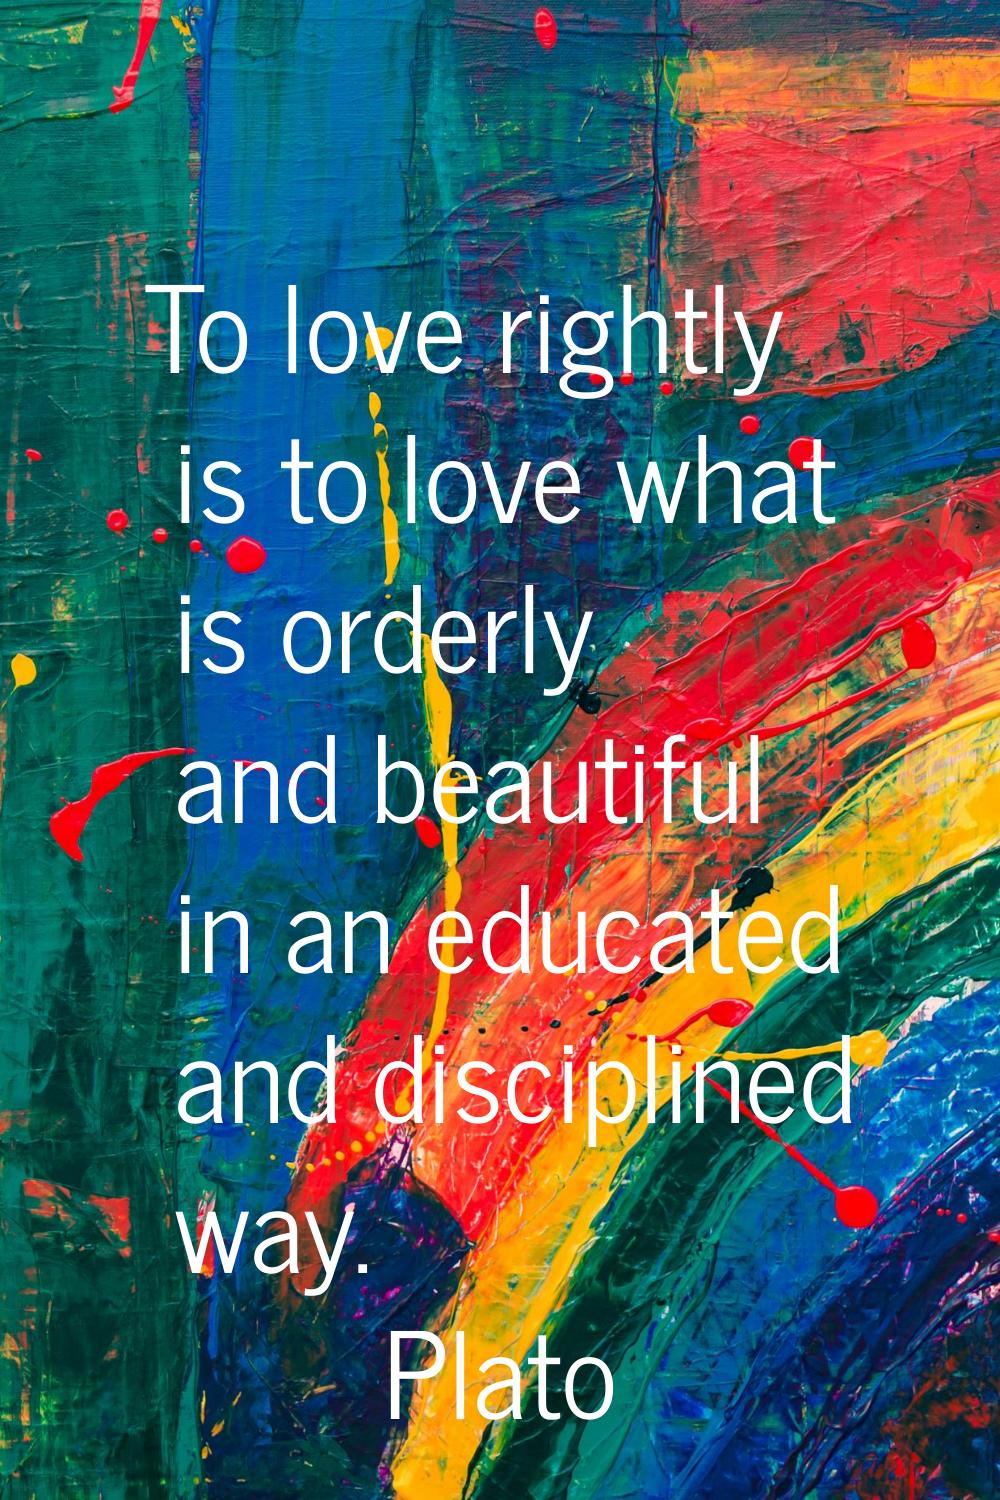 To love rightly is to love what is orderly and beautiful in an educated and disciplined way.